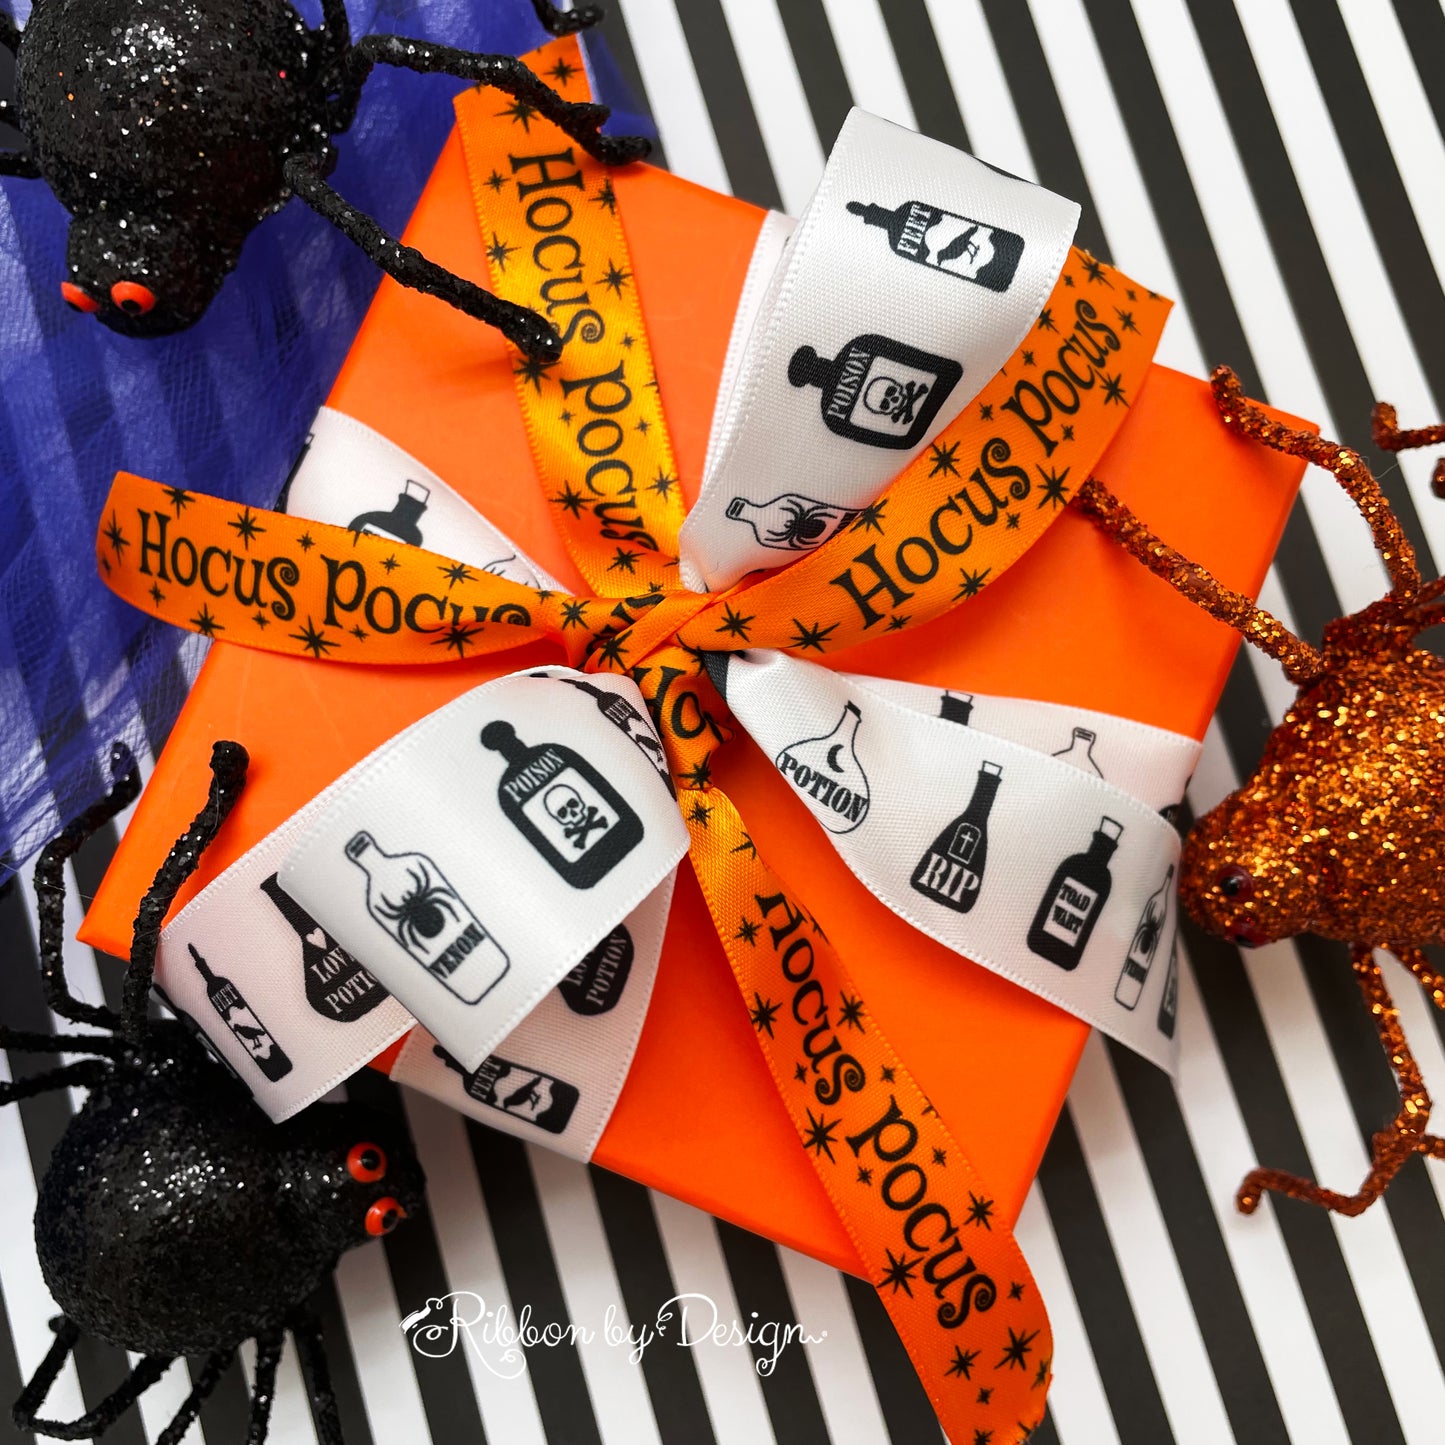 Mix and match our Hocus Pocus ribbon with Potion Bottles for a truly magical Halloween gift wrap!